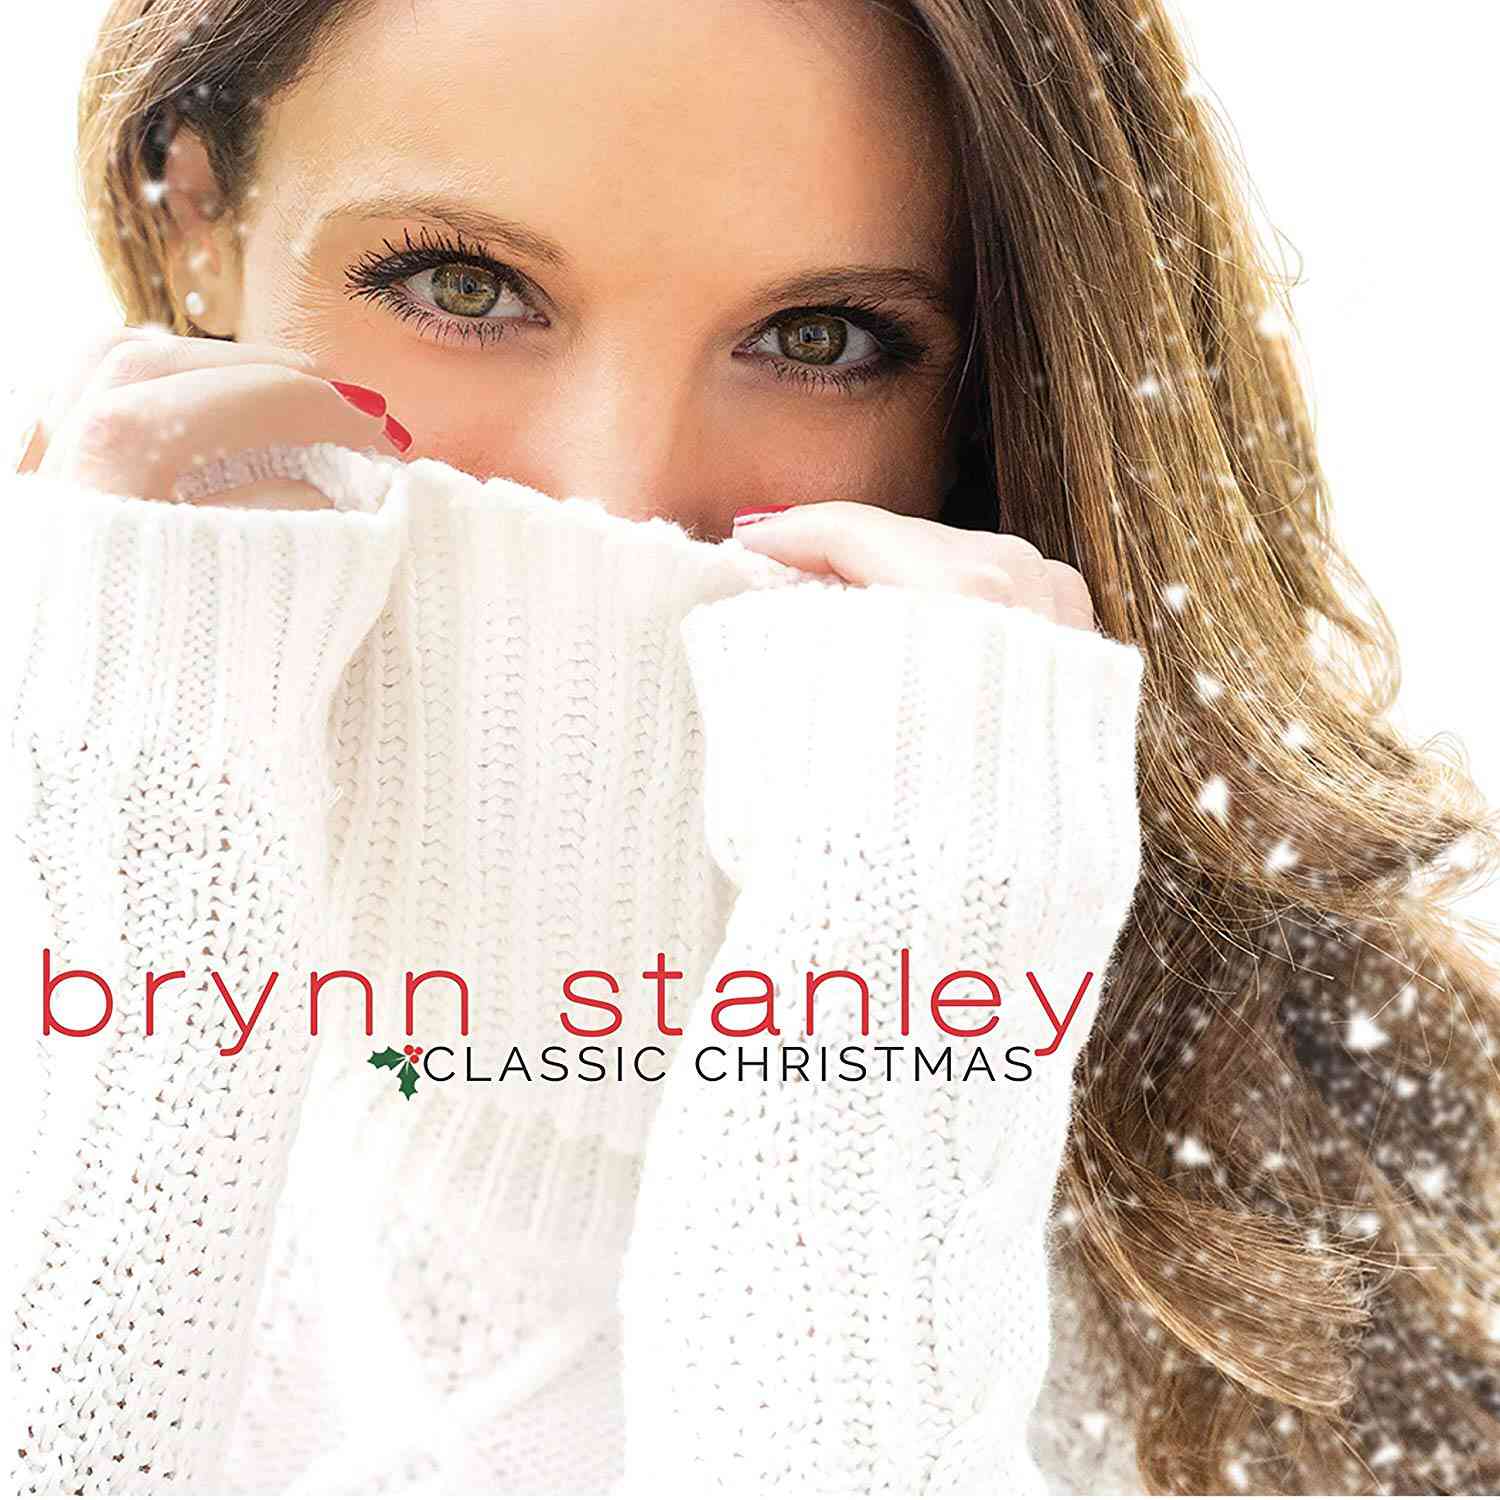 album cover of Brynn Stanley classic christmas